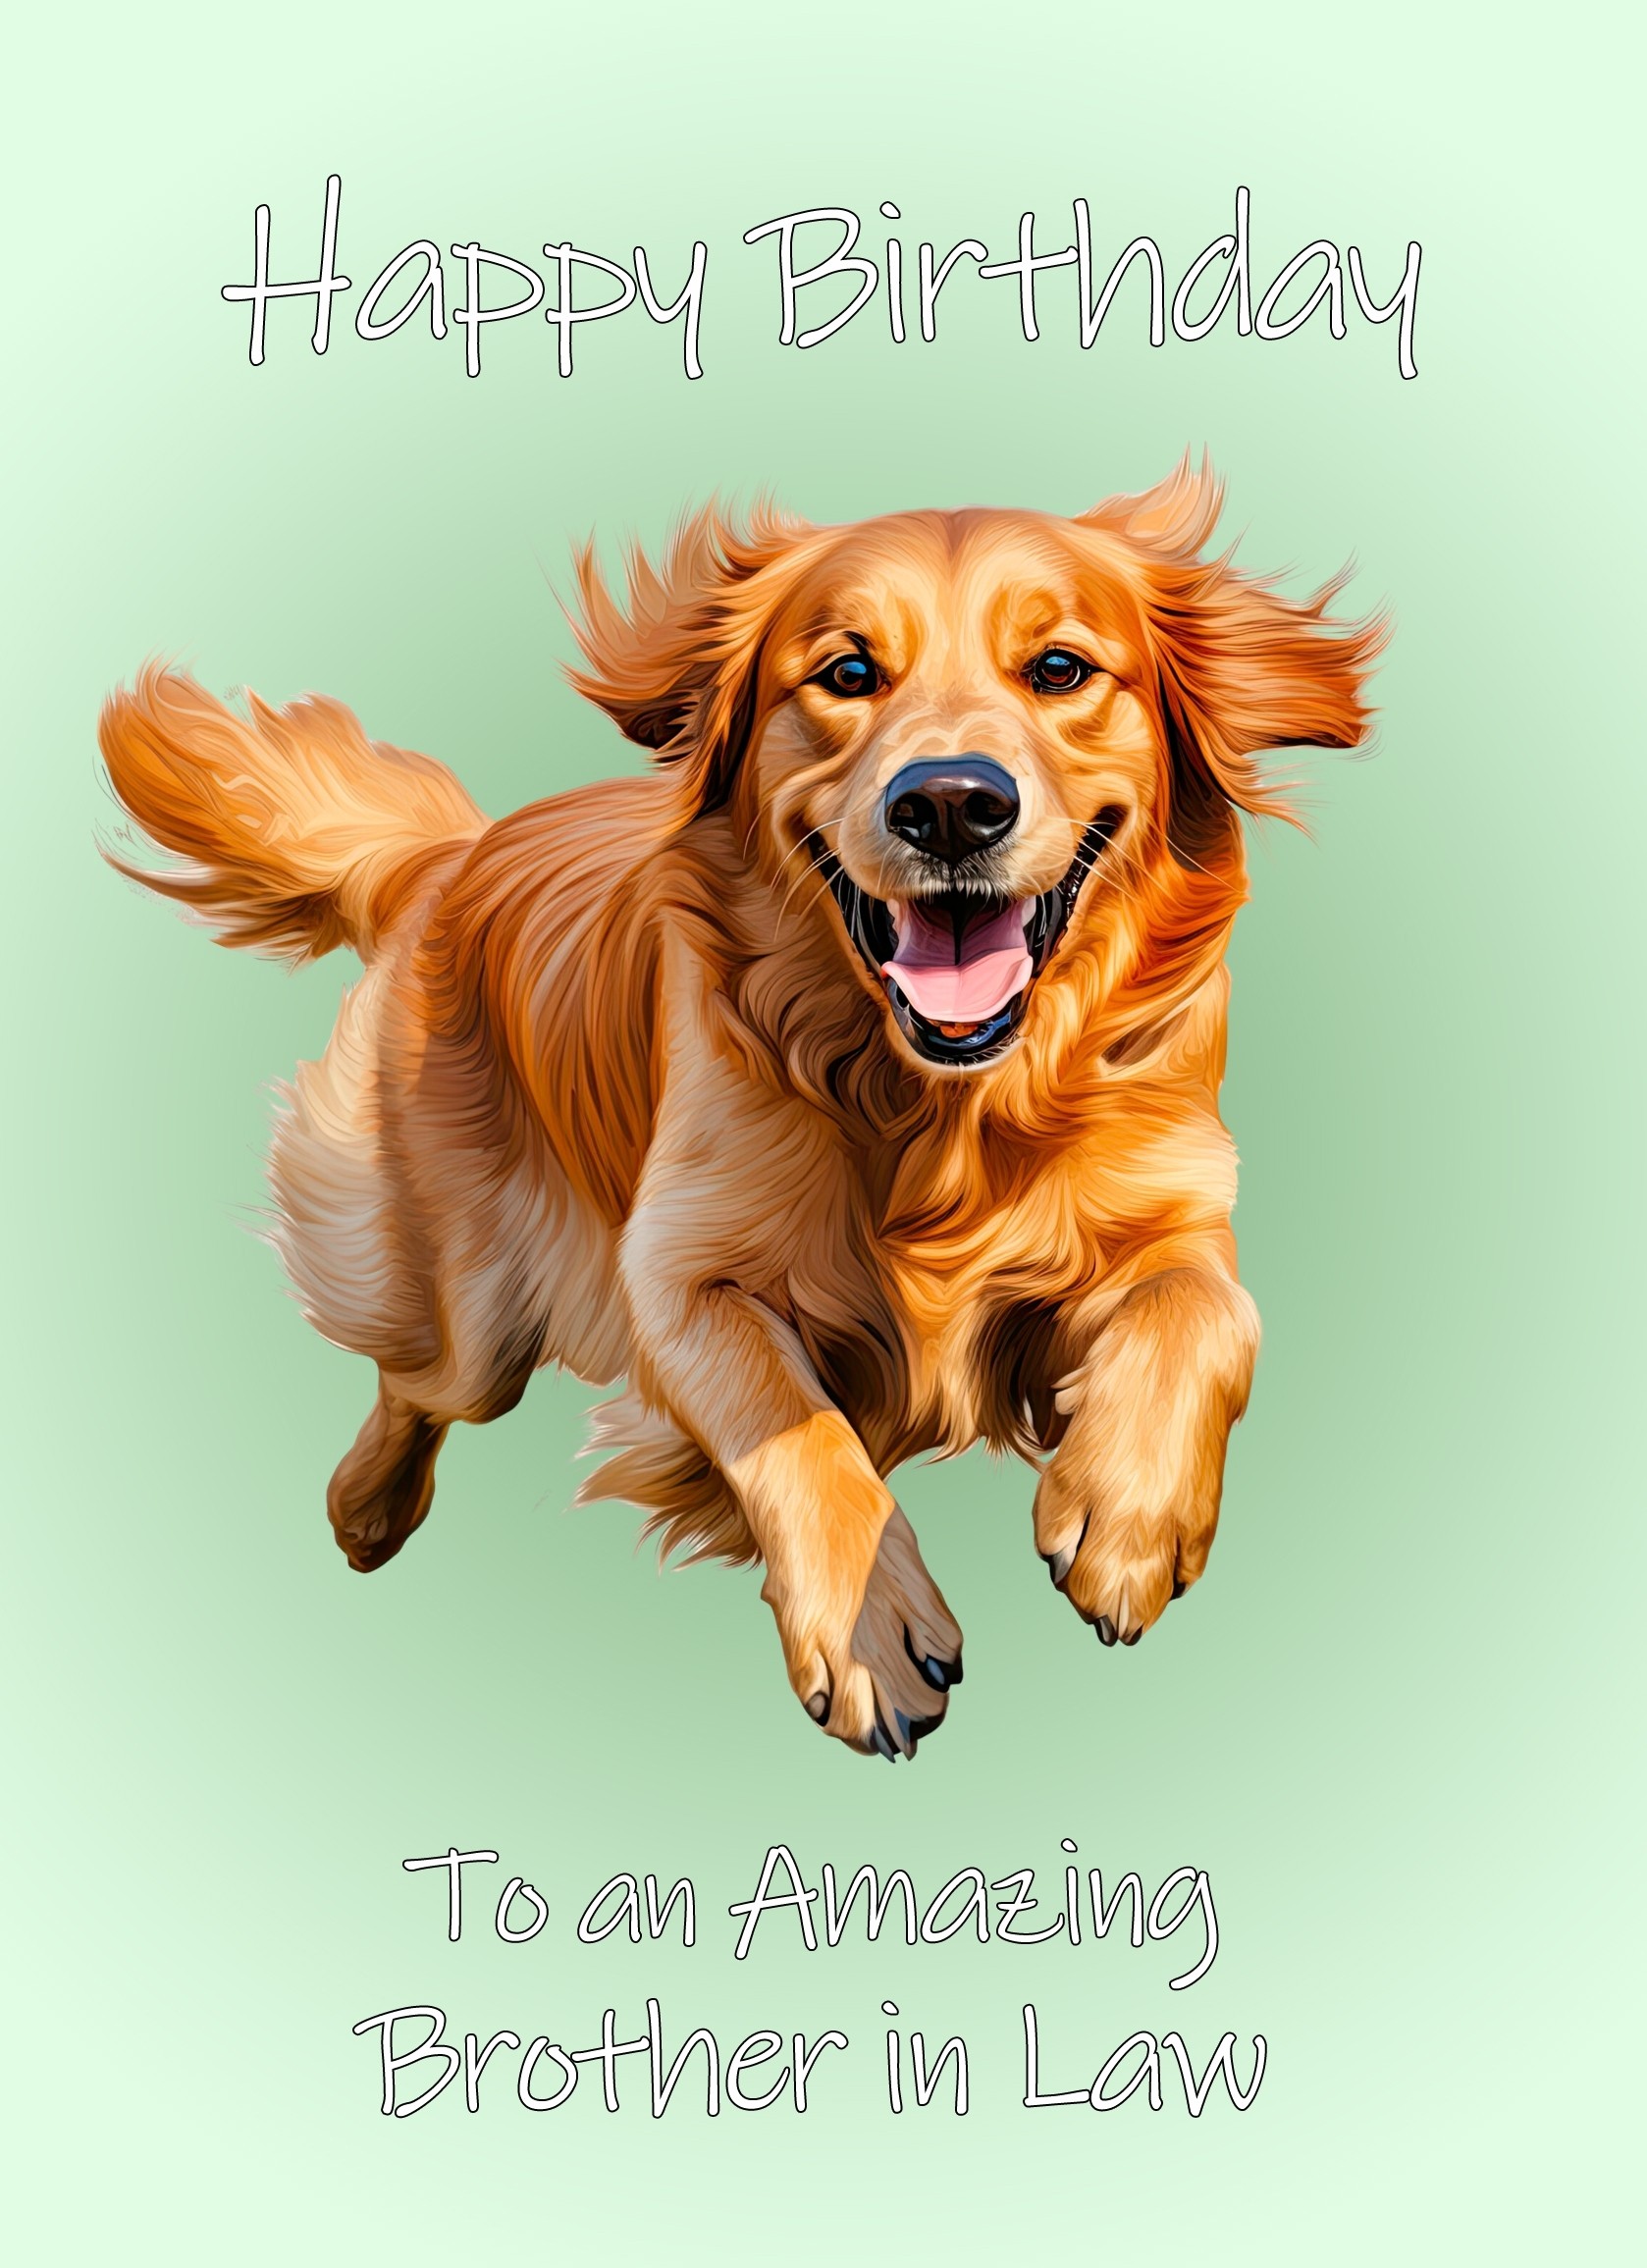 Golden Retriever Dog Birthday Card For Brother in Law